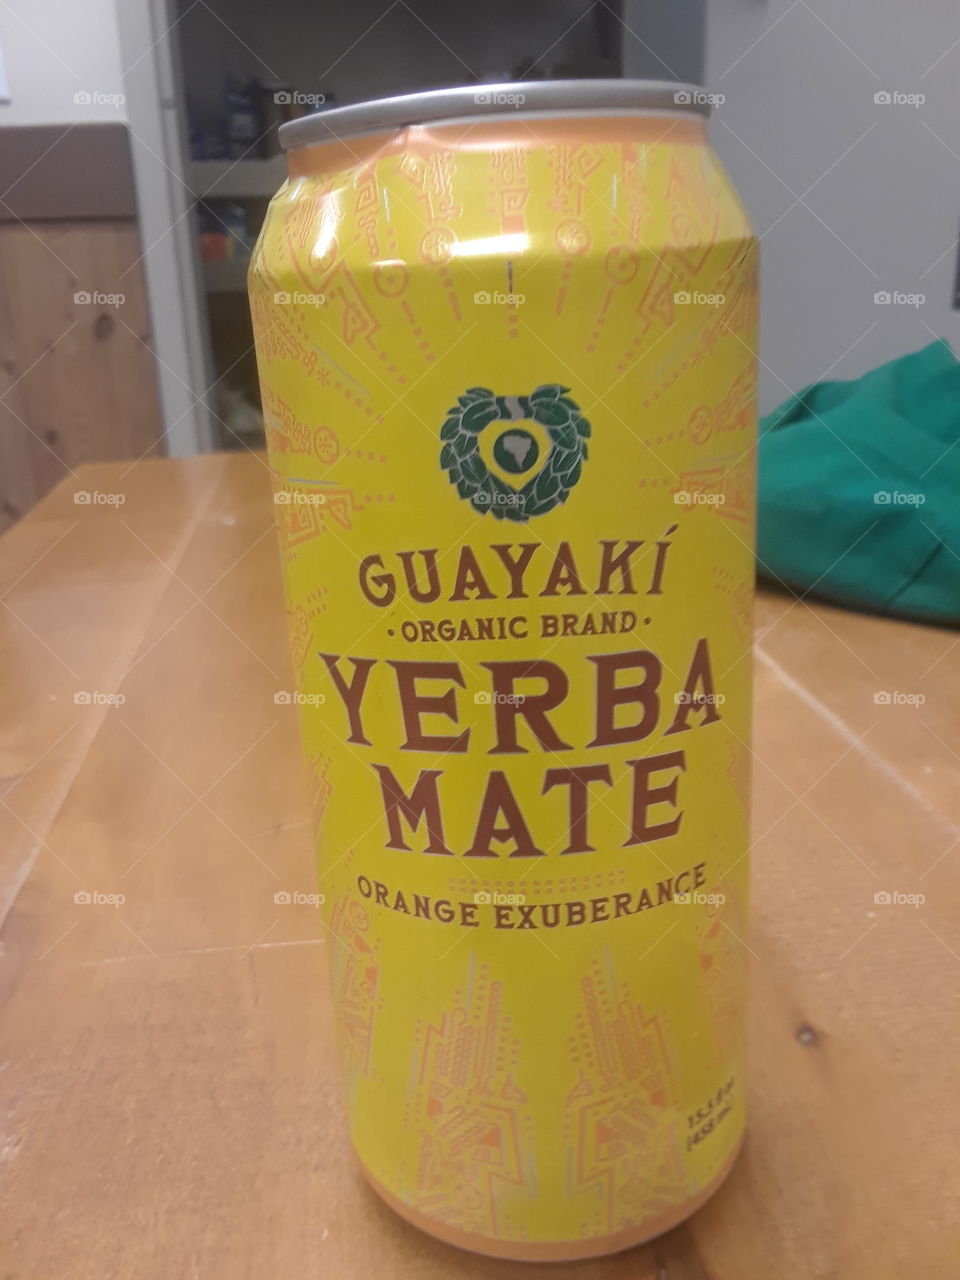 guayaki organic brand. High energy infusion drink.Orange exuberance.Come to life. Non carbonated.Pretty good drink overall from the other bluephoria that i had.